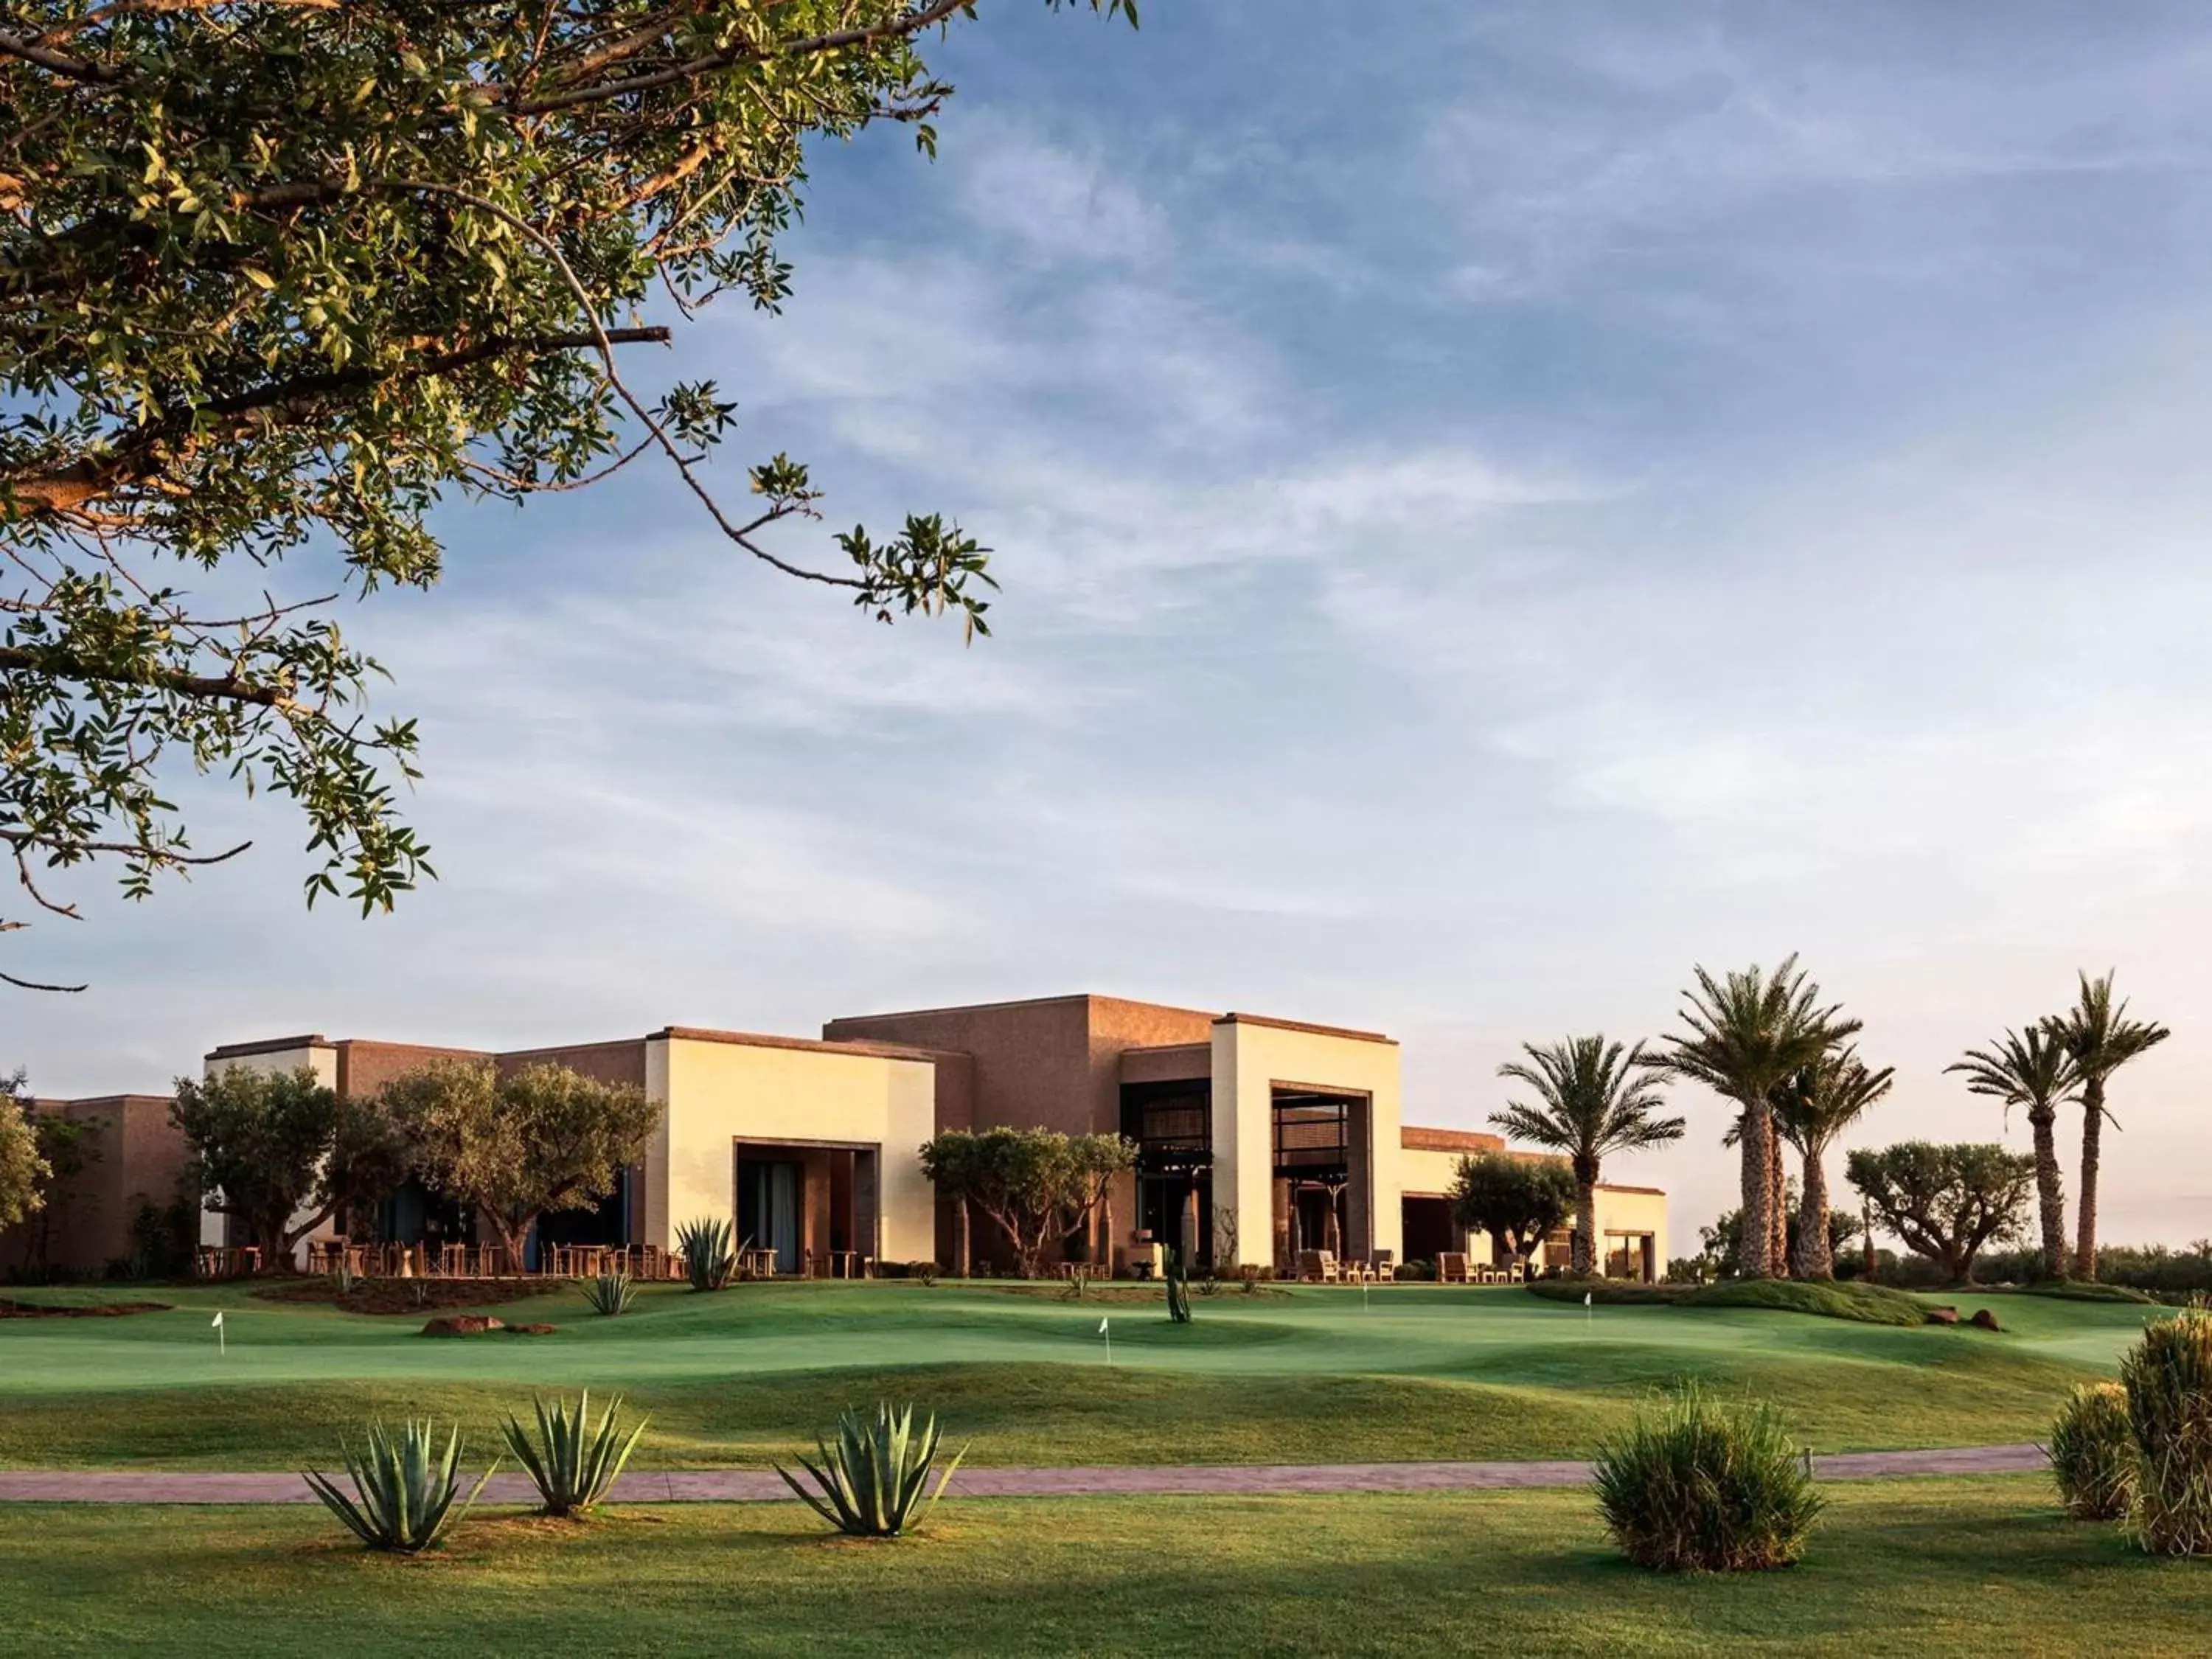 On site, Property Building in Fairmont Royal Palm Marrakech